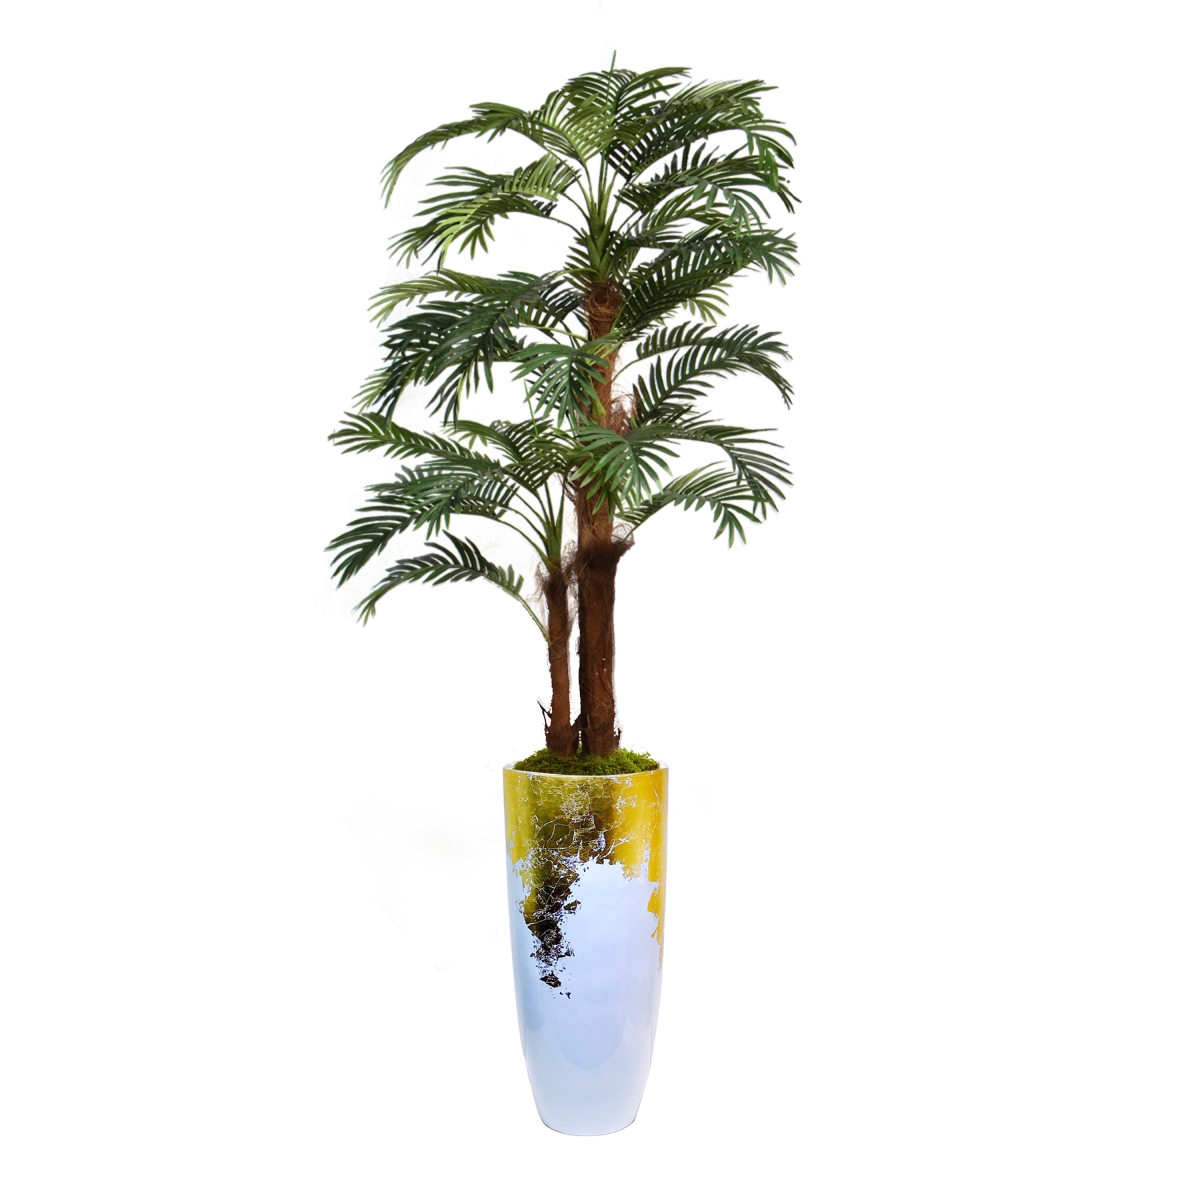 Vhx135221 87.5 In. Palm Tree Faux Decor With Burlap Kit In Gold Resin Planter